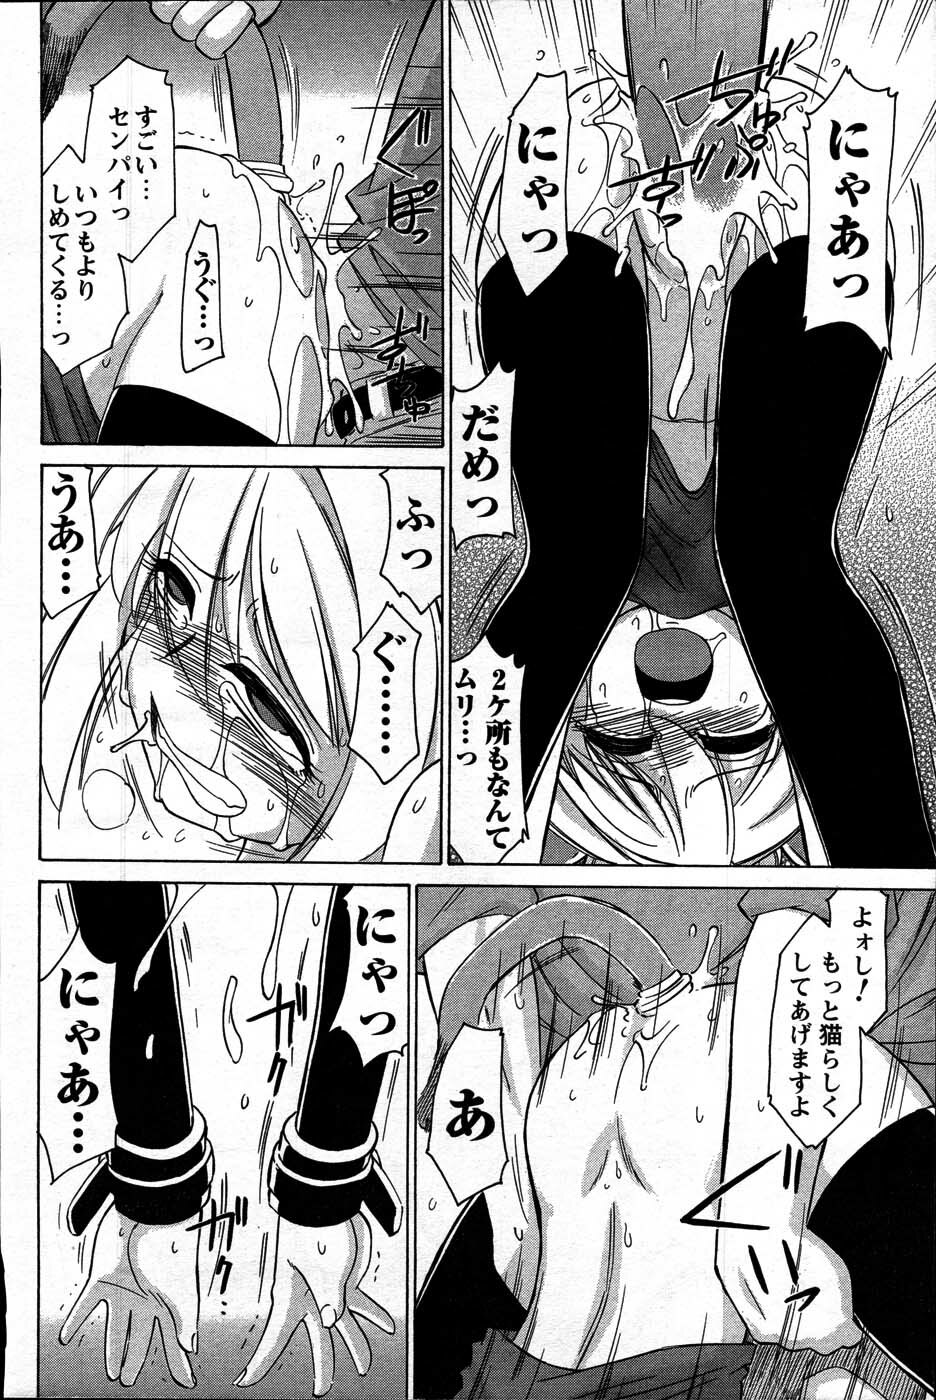 Comic Mens Young Special IKAZUCHI vol. 2 page 46 full